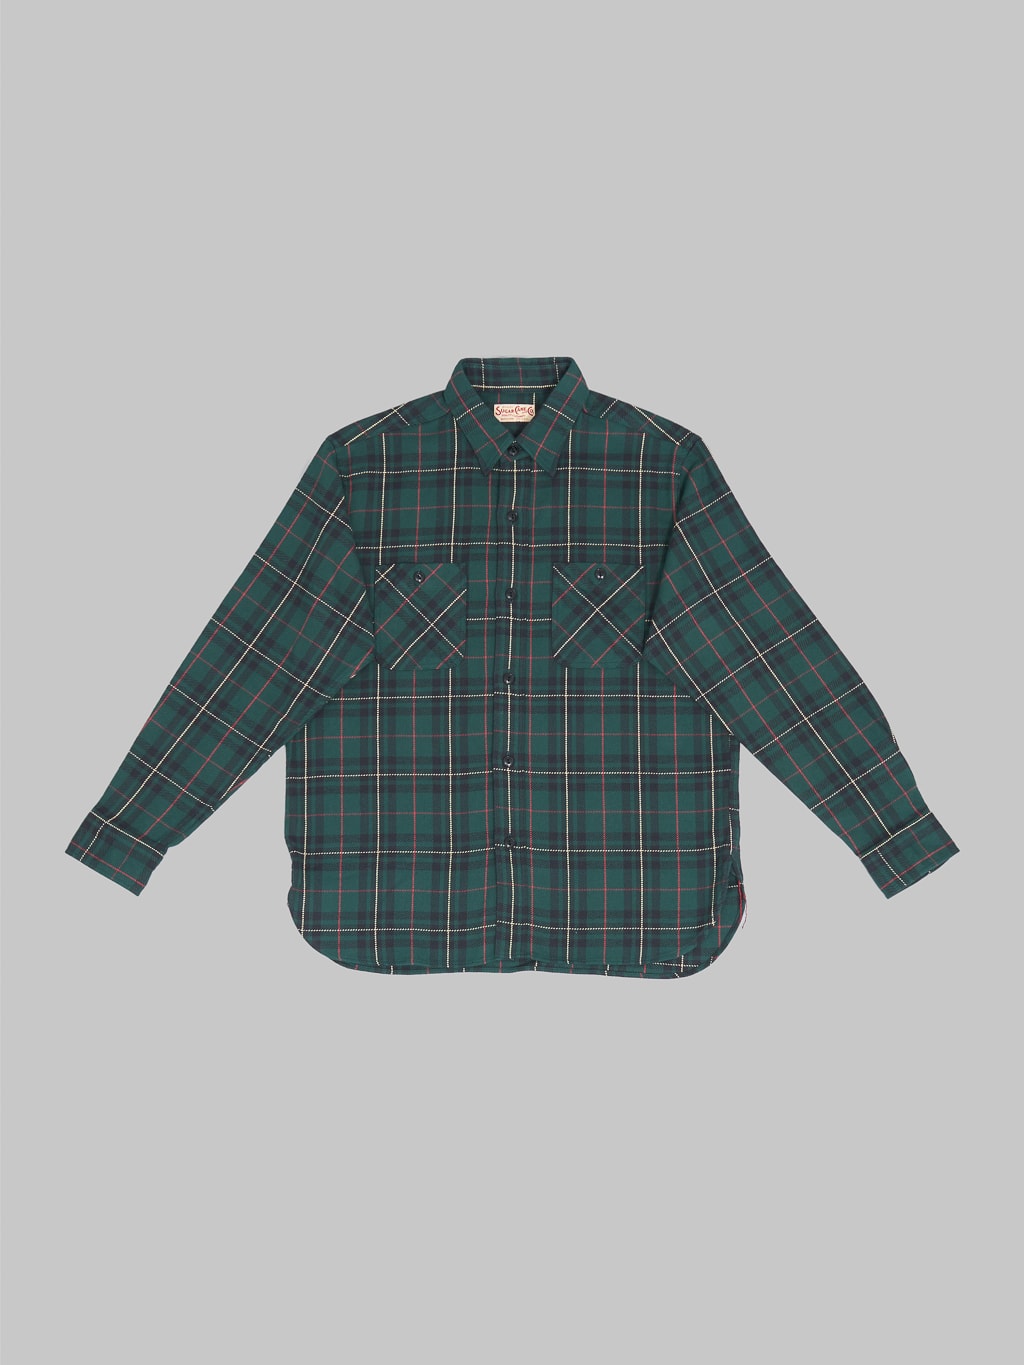 Sugar Cane Twill Check Flannel Shirt green front